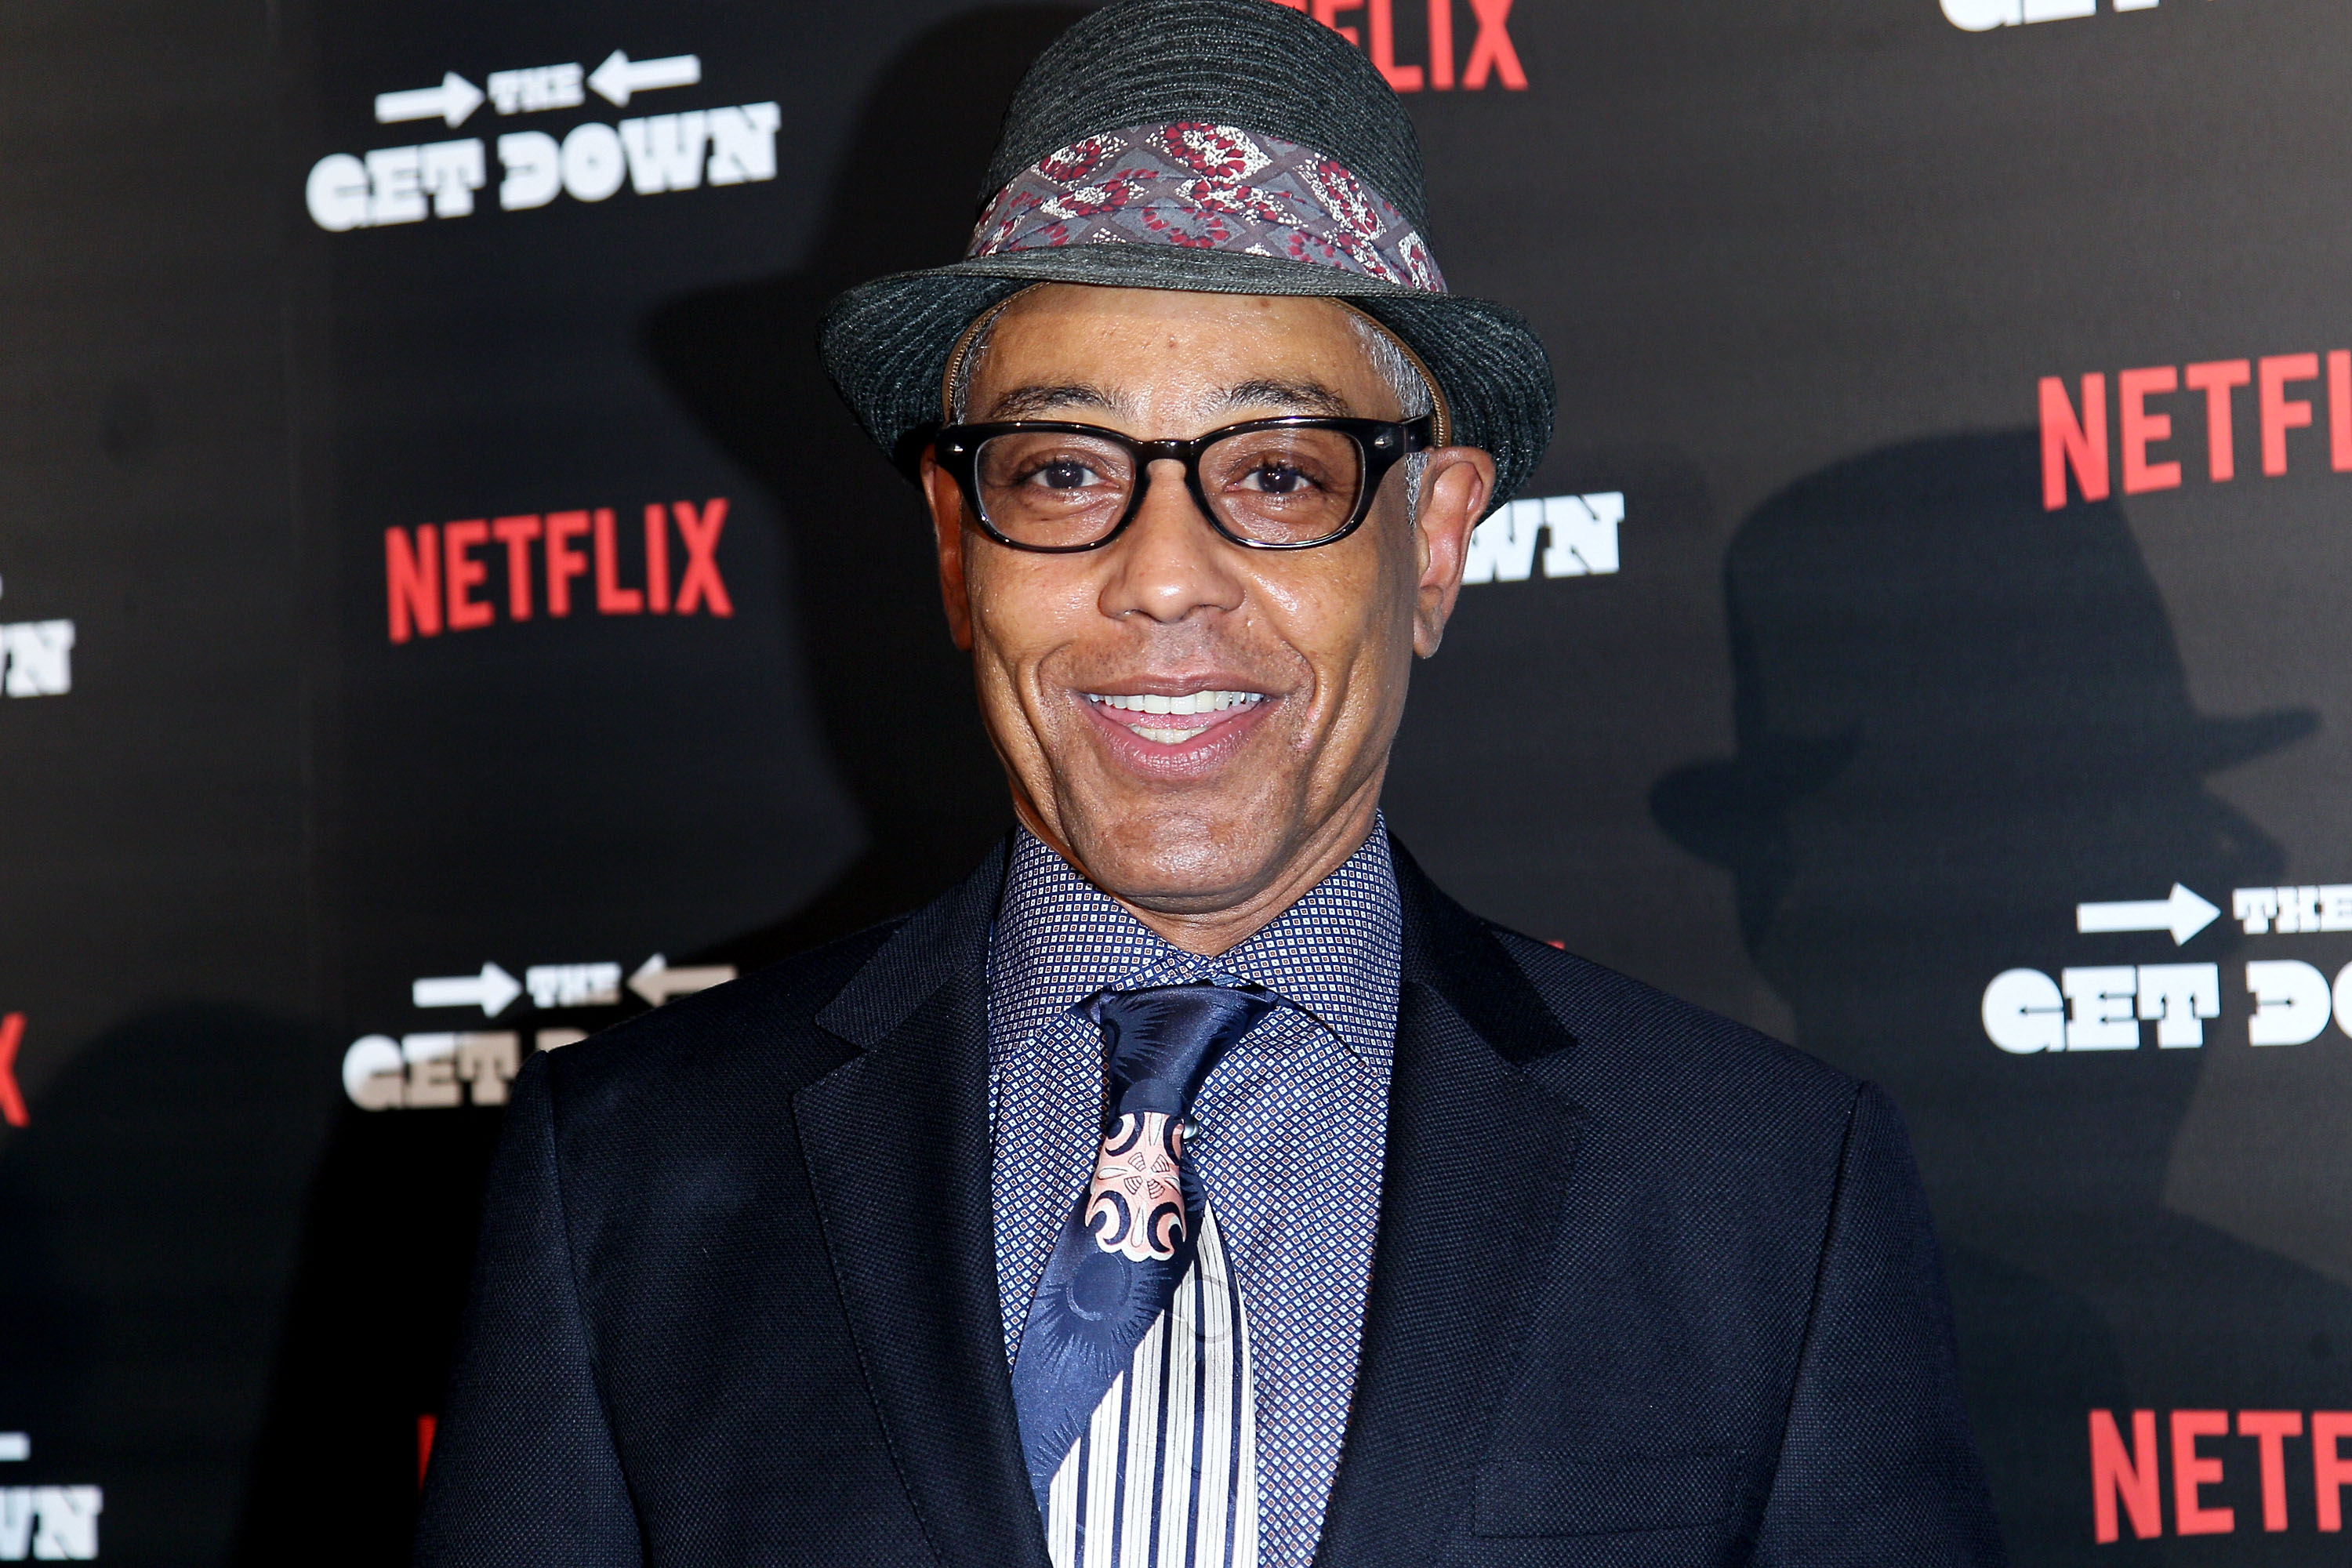 Giancarlo Esposito attends the "The Get Down" New York Premiere at Lehman Center For The Performing Arts on August 11, 2016 in New York City. (Steve Mack&mdash;FilmMagic/Getty Images)